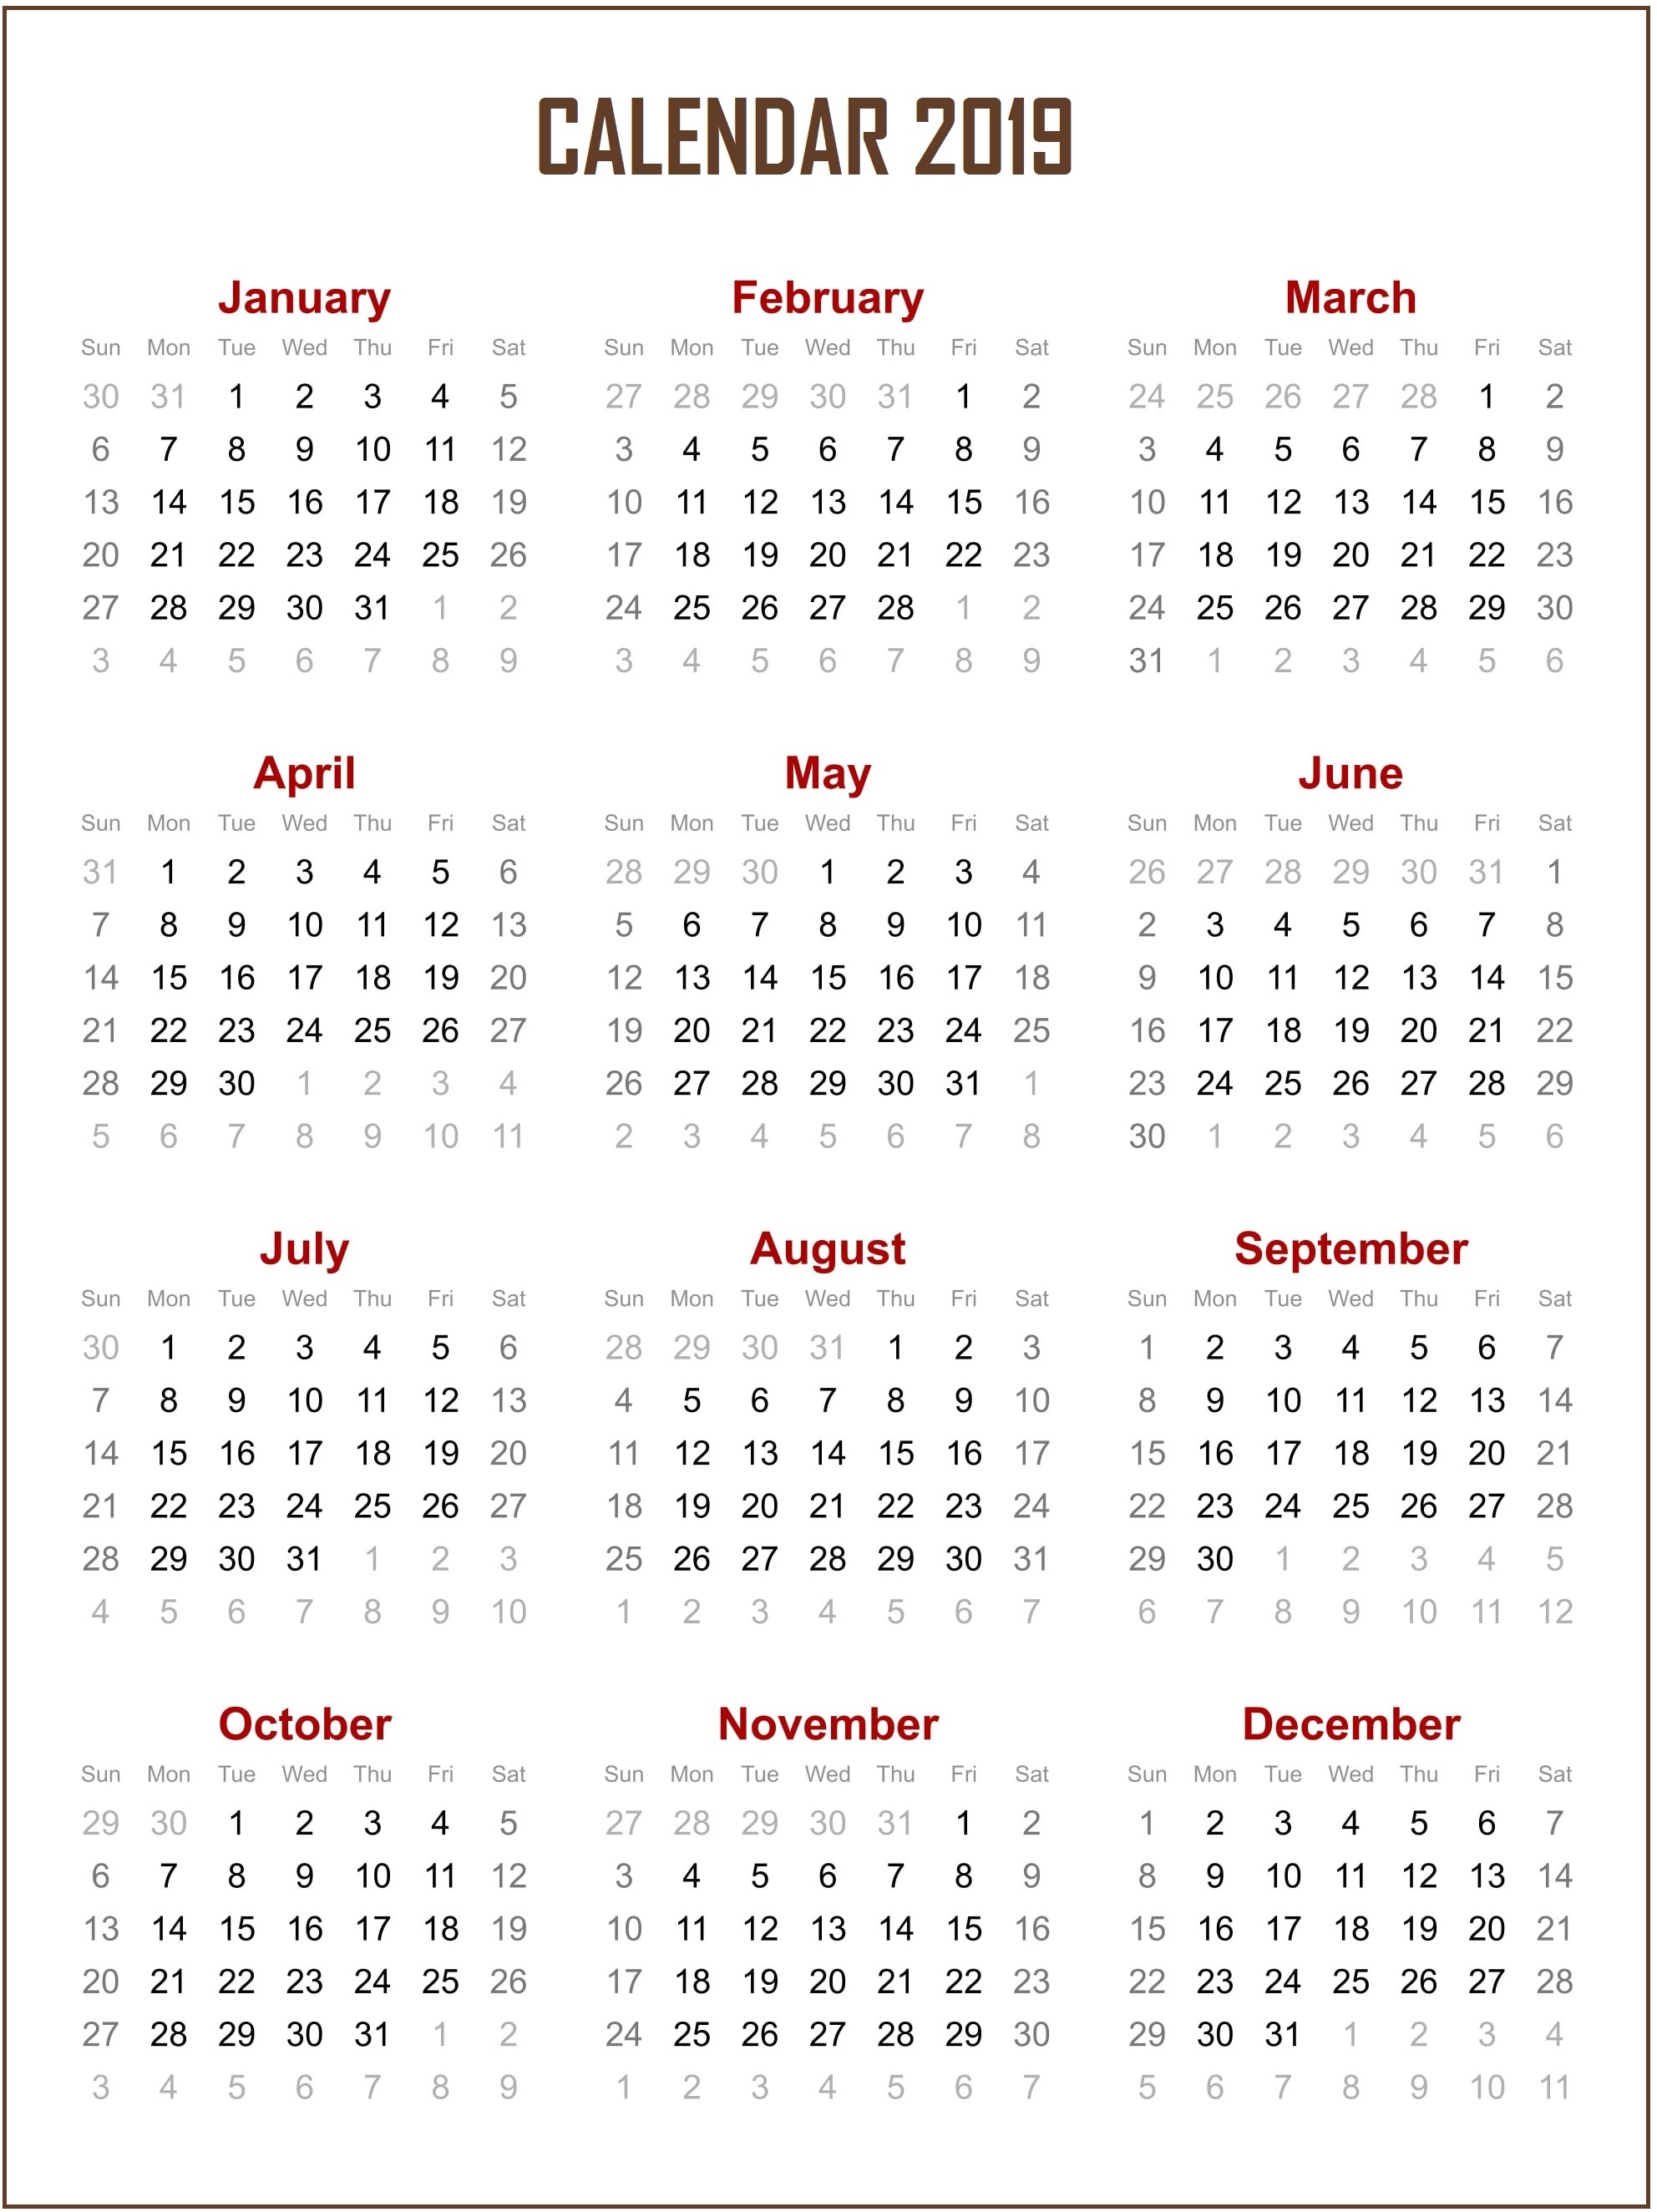 Download 2019 Yearly Calendar - Free August 2019 Calendar